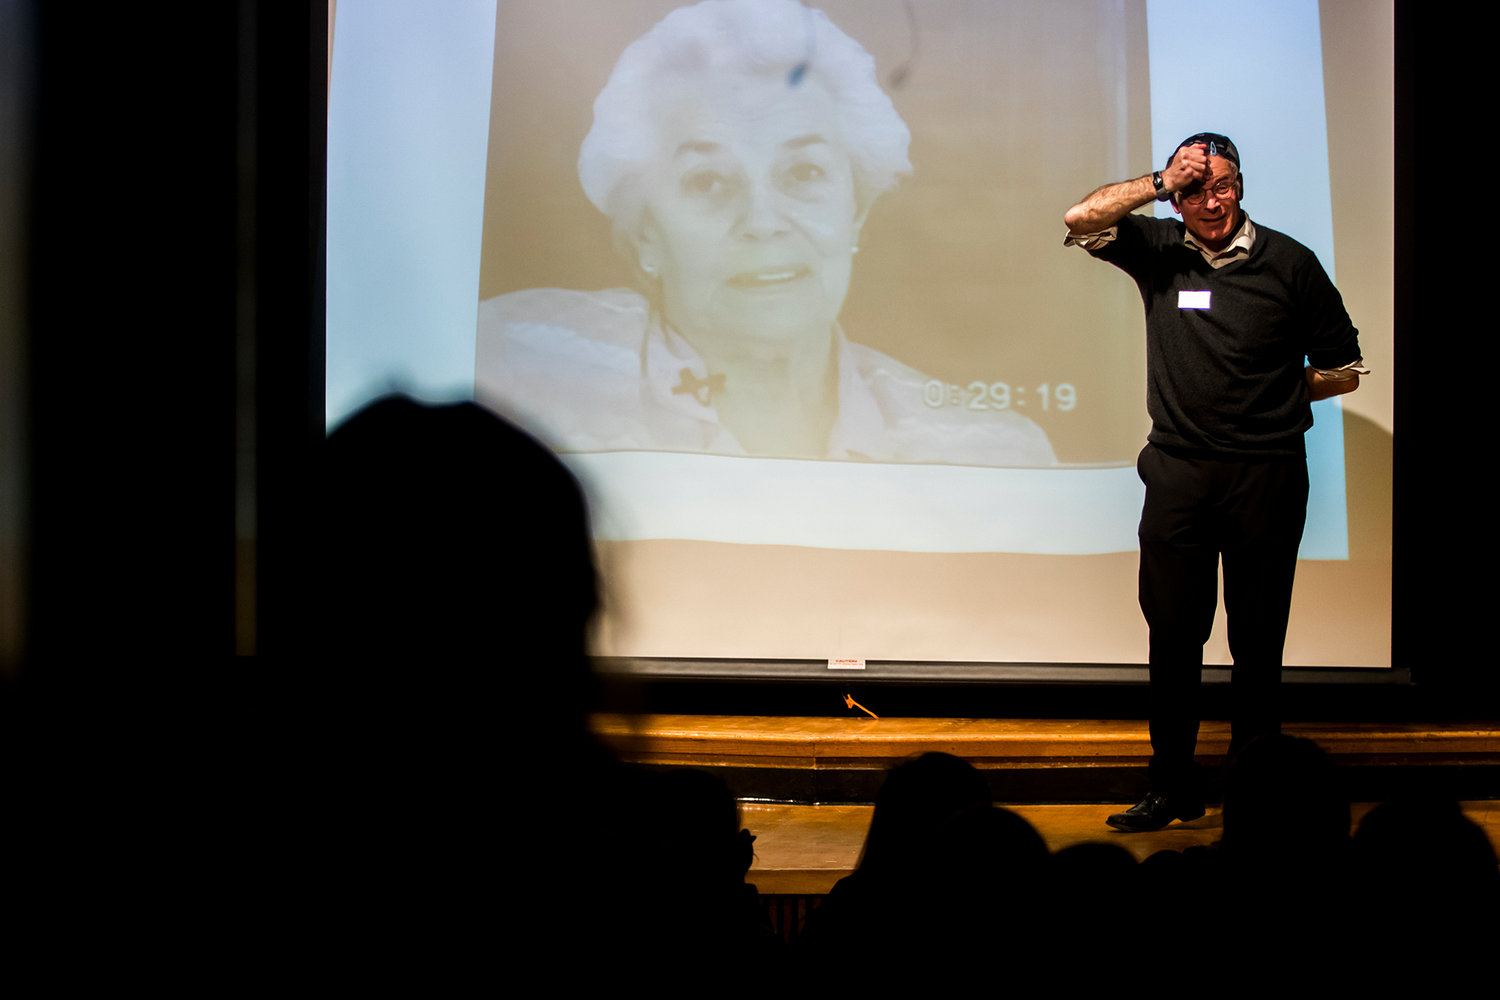 Matthew Erlich stands on stage in front of a picture of his mother Felicia Lewkowicz (born June 21, 1924) who survived two Nazi death camps.